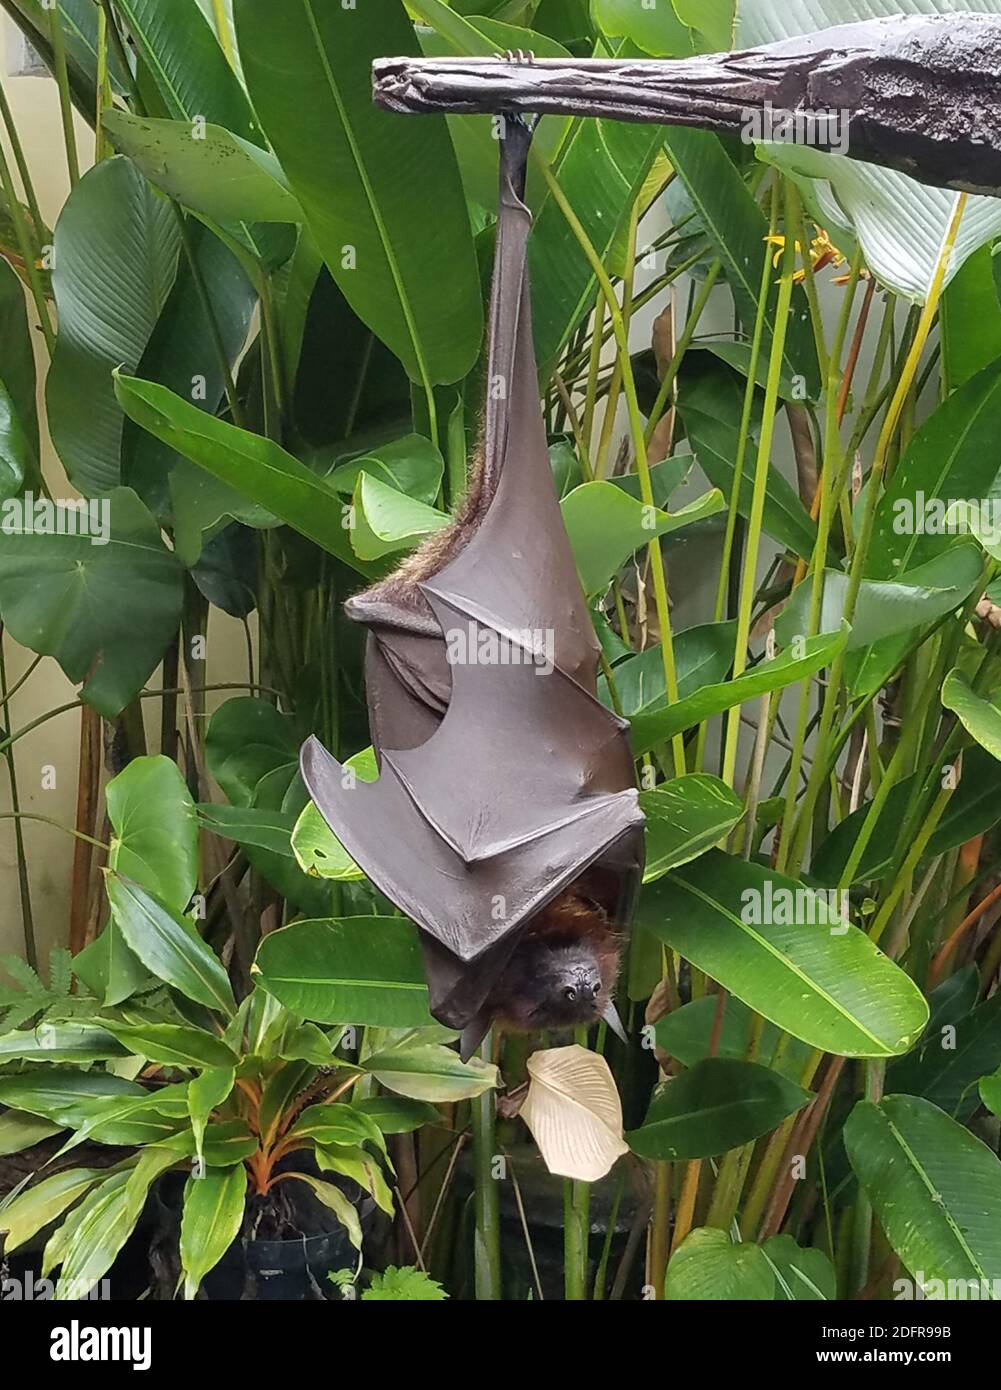 Large fruit bat or flying fox hanging upside-down in a tree in Bali, Indonesia Stock Photo